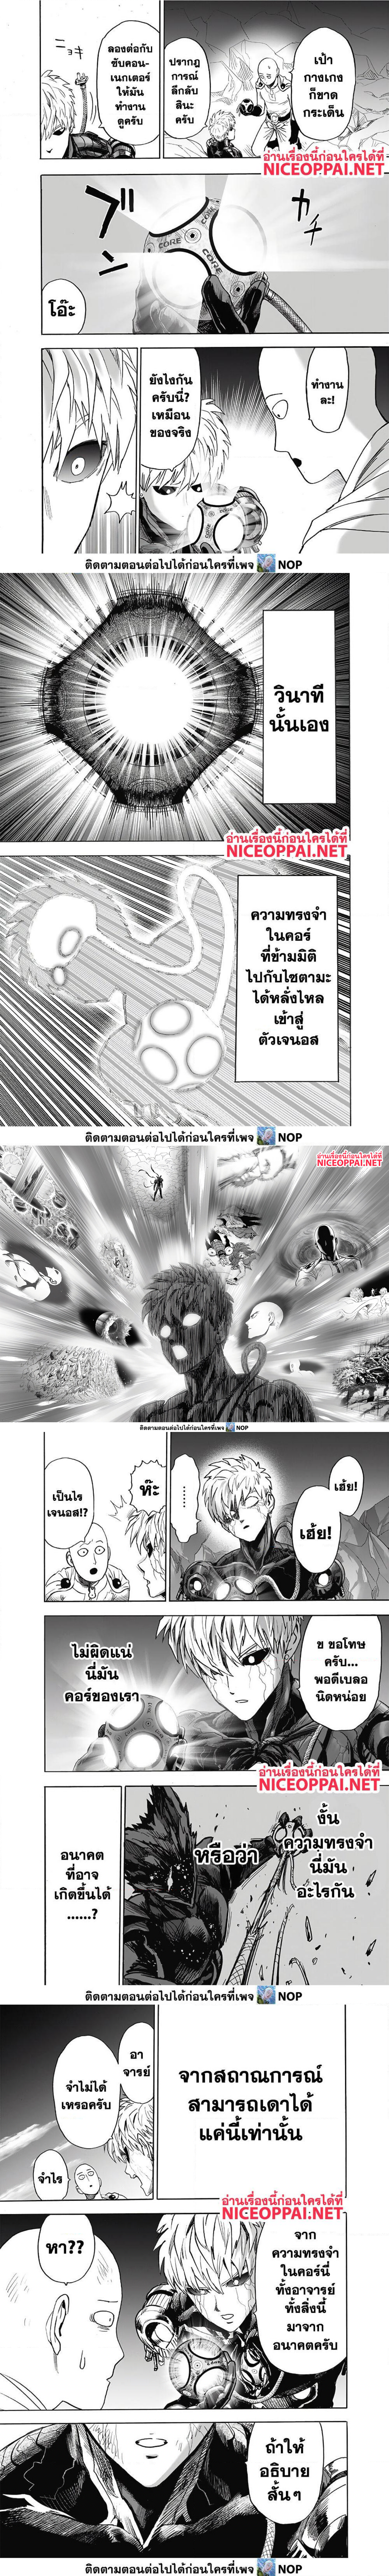 One-Punch-Man-169-2.png